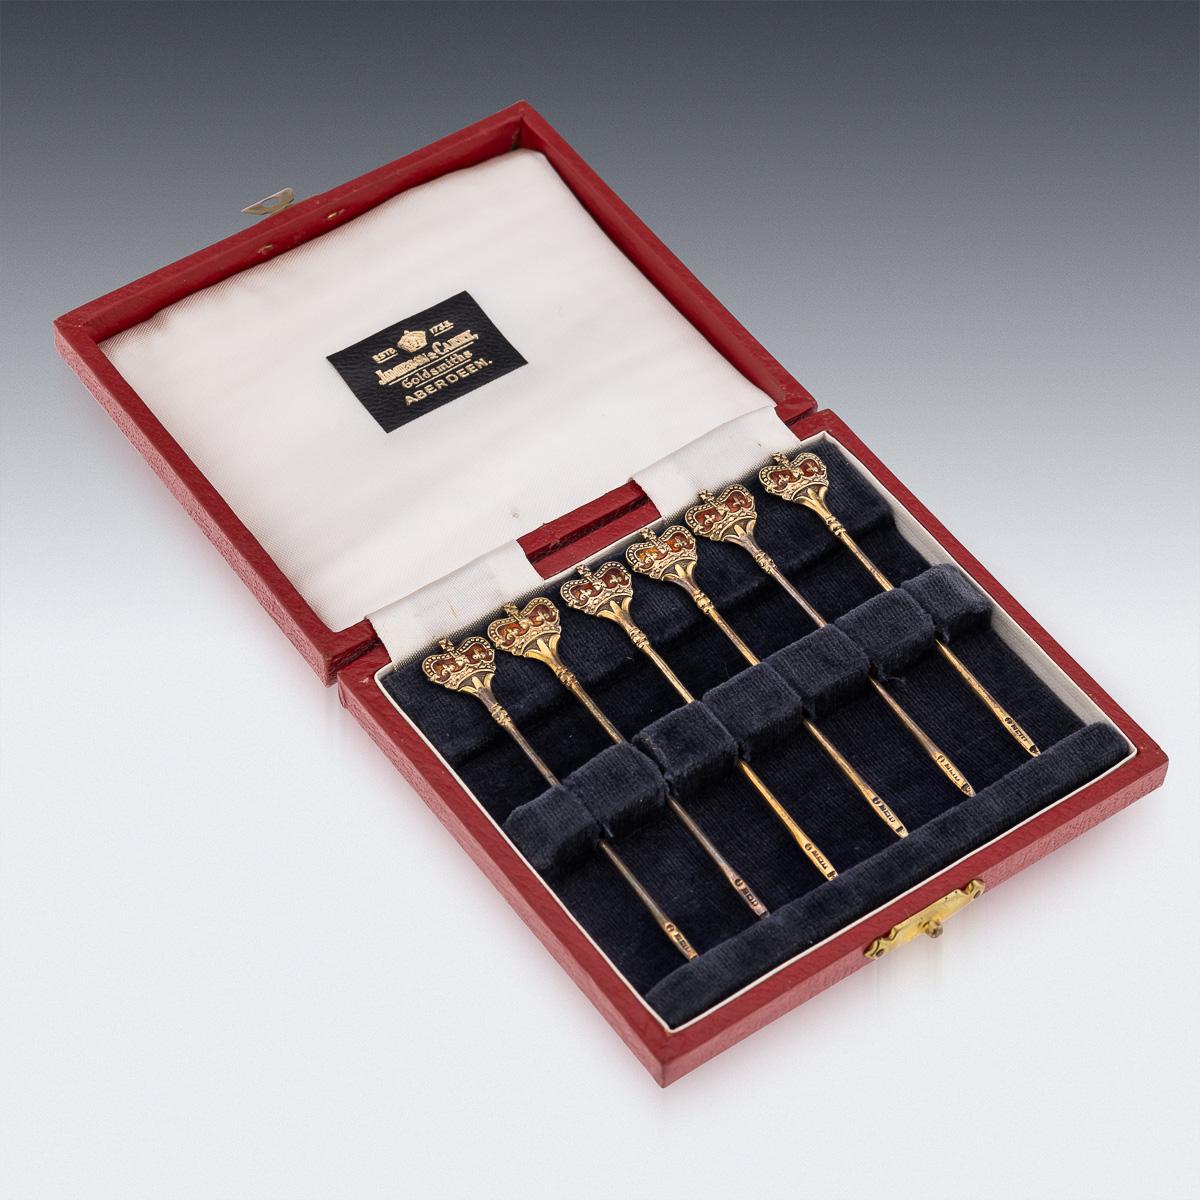 Mid 20th Century British solid silver-gilt set of six cocktail picks, decorated with enamels depicting royal crowns. The set comes in its original leatherette and velvet lined box. Each piece is Hallmarked English silver (925 Standard), Birmingham,